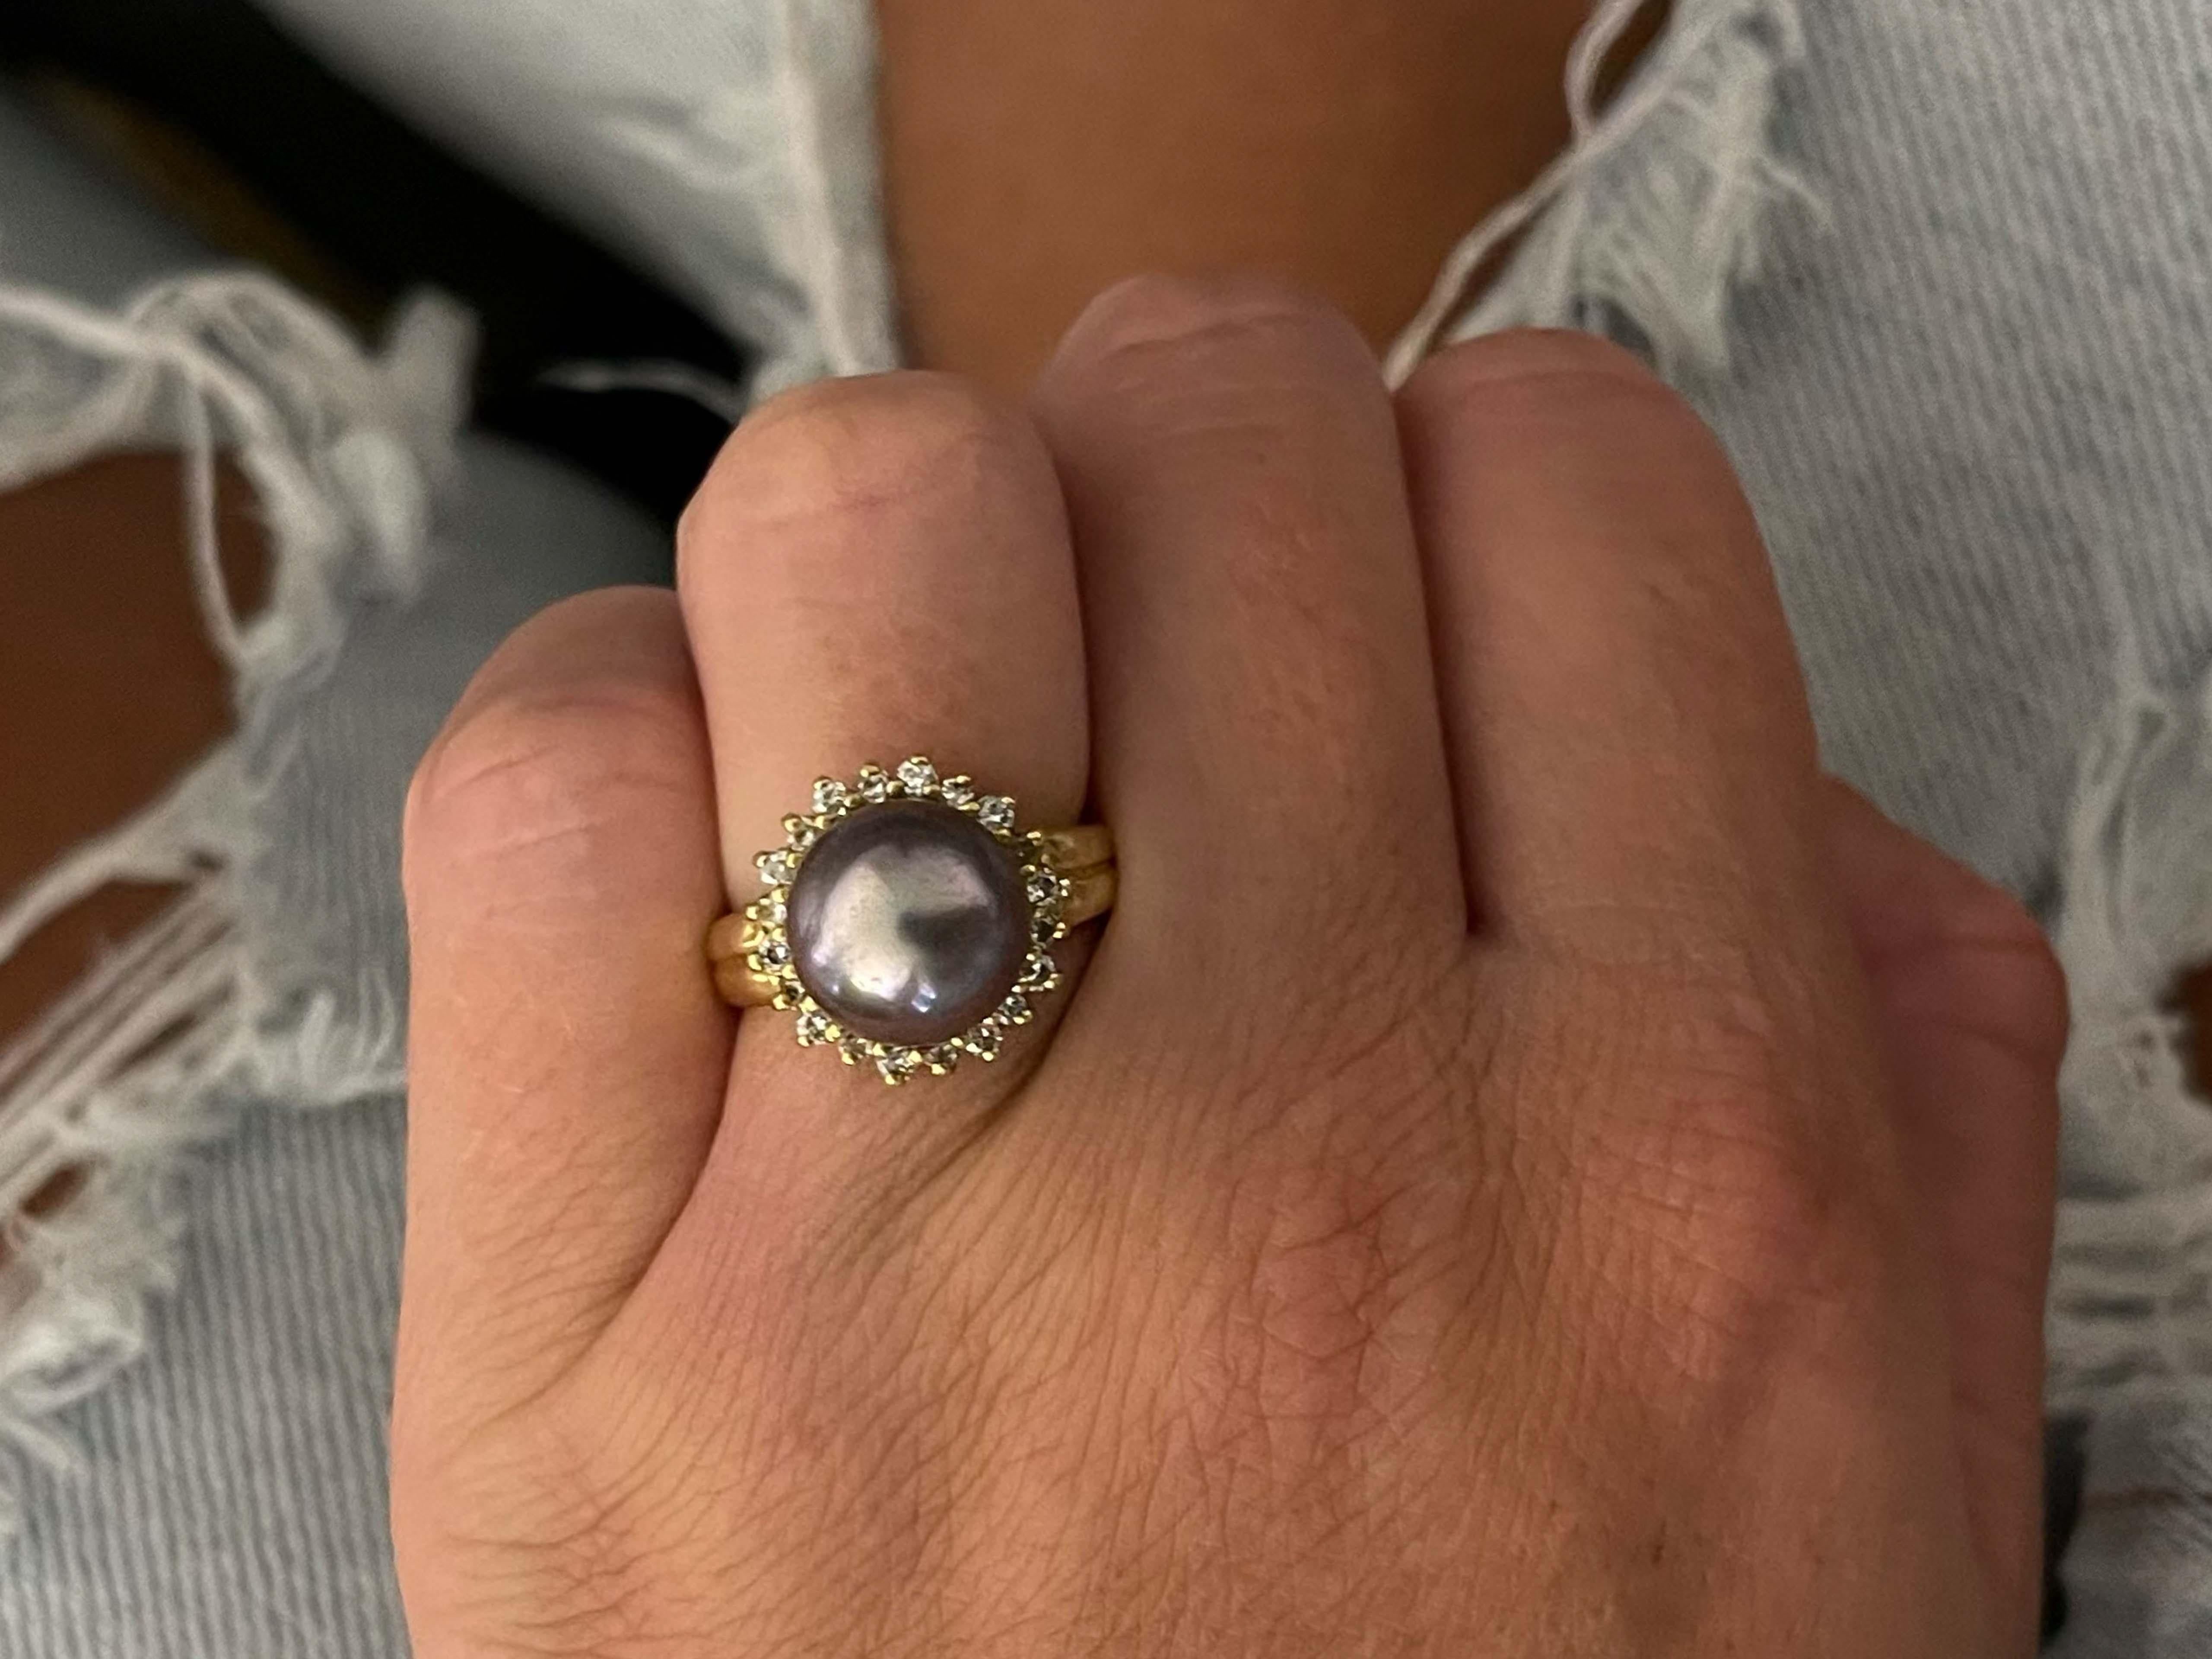 Ring Specifications:

Metal: 18K Yellow Gold
​
​Weight: 8.3 grams

Ring Size: US 6
​
Pearl Diameter: 11 mm

Diamond Specifications:

Shape:  Round Brilliant cut

Color: H-I

Clarity: SI1

Total Carat Weight: Approximately 0.20 Carats.
​
​Stamped: